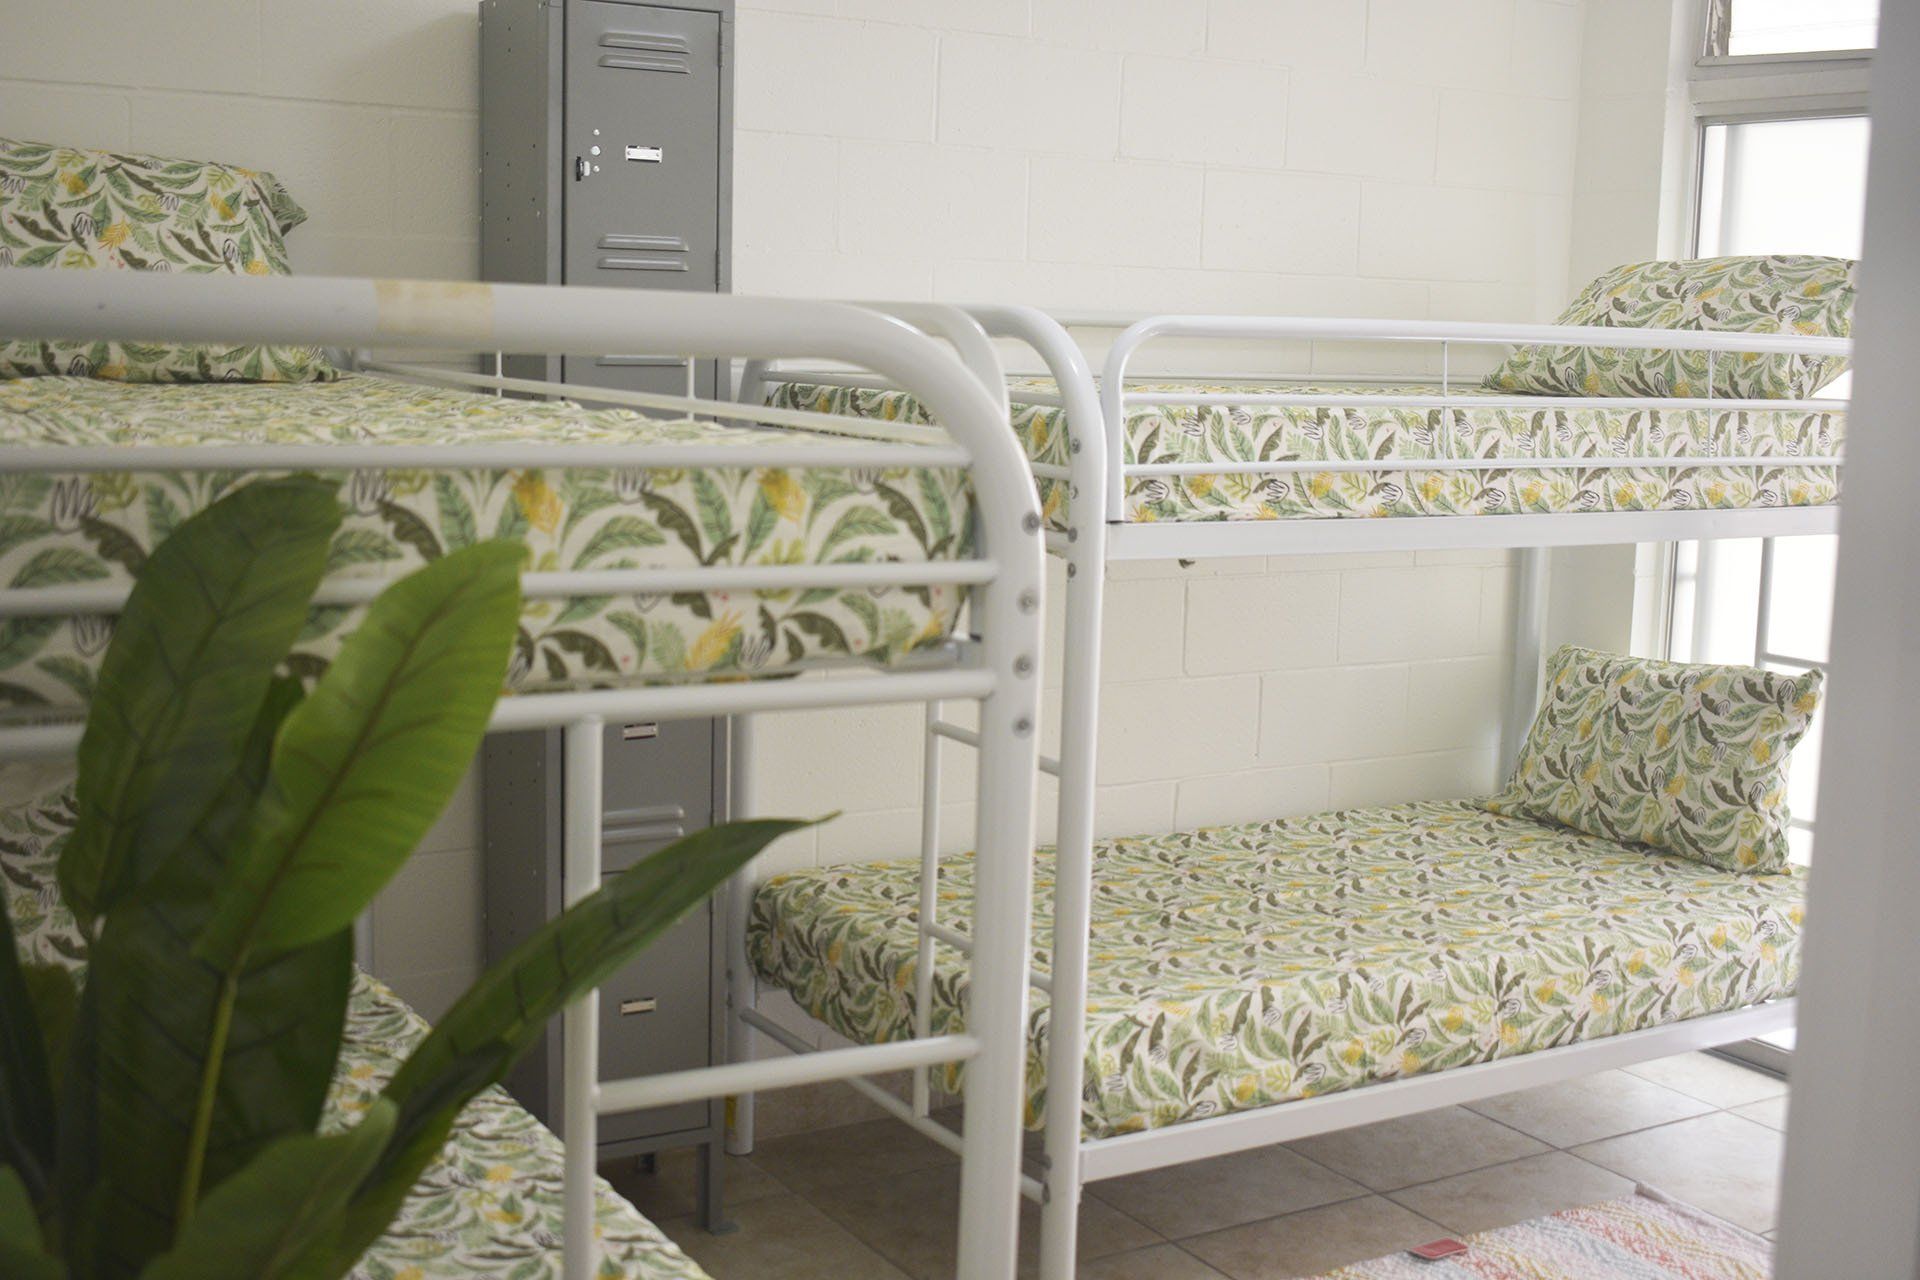 Waikiki Beachside Hostel 8 bed dorm room. Tropical bunk beds and lockers